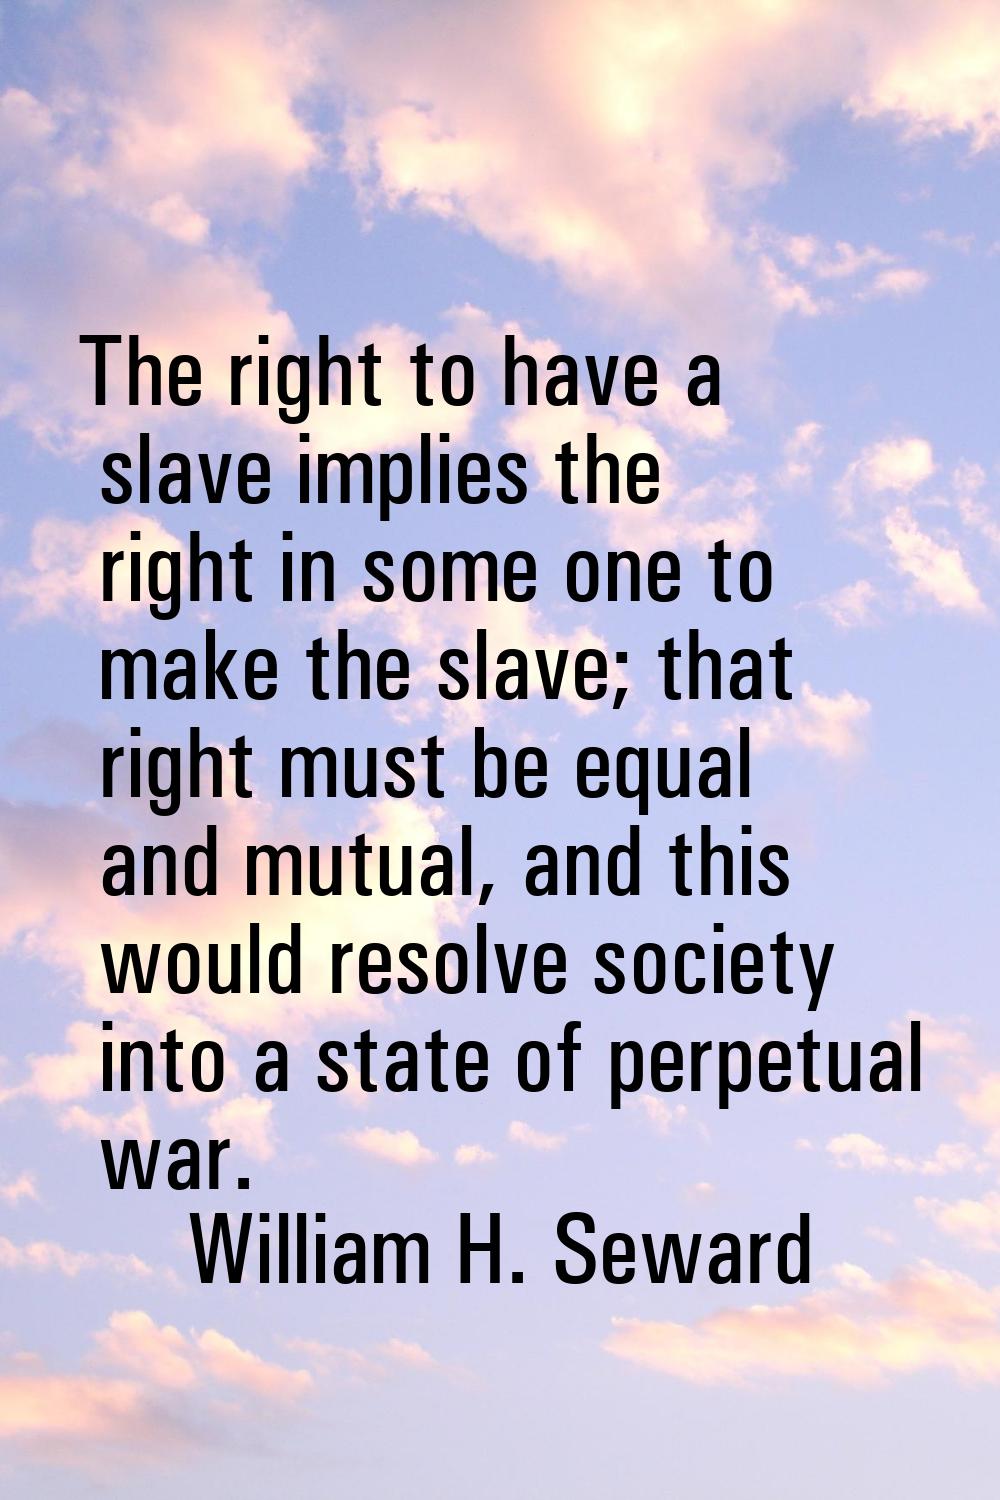 The right to have a slave implies the right in some one to make the slave; that right must be equal